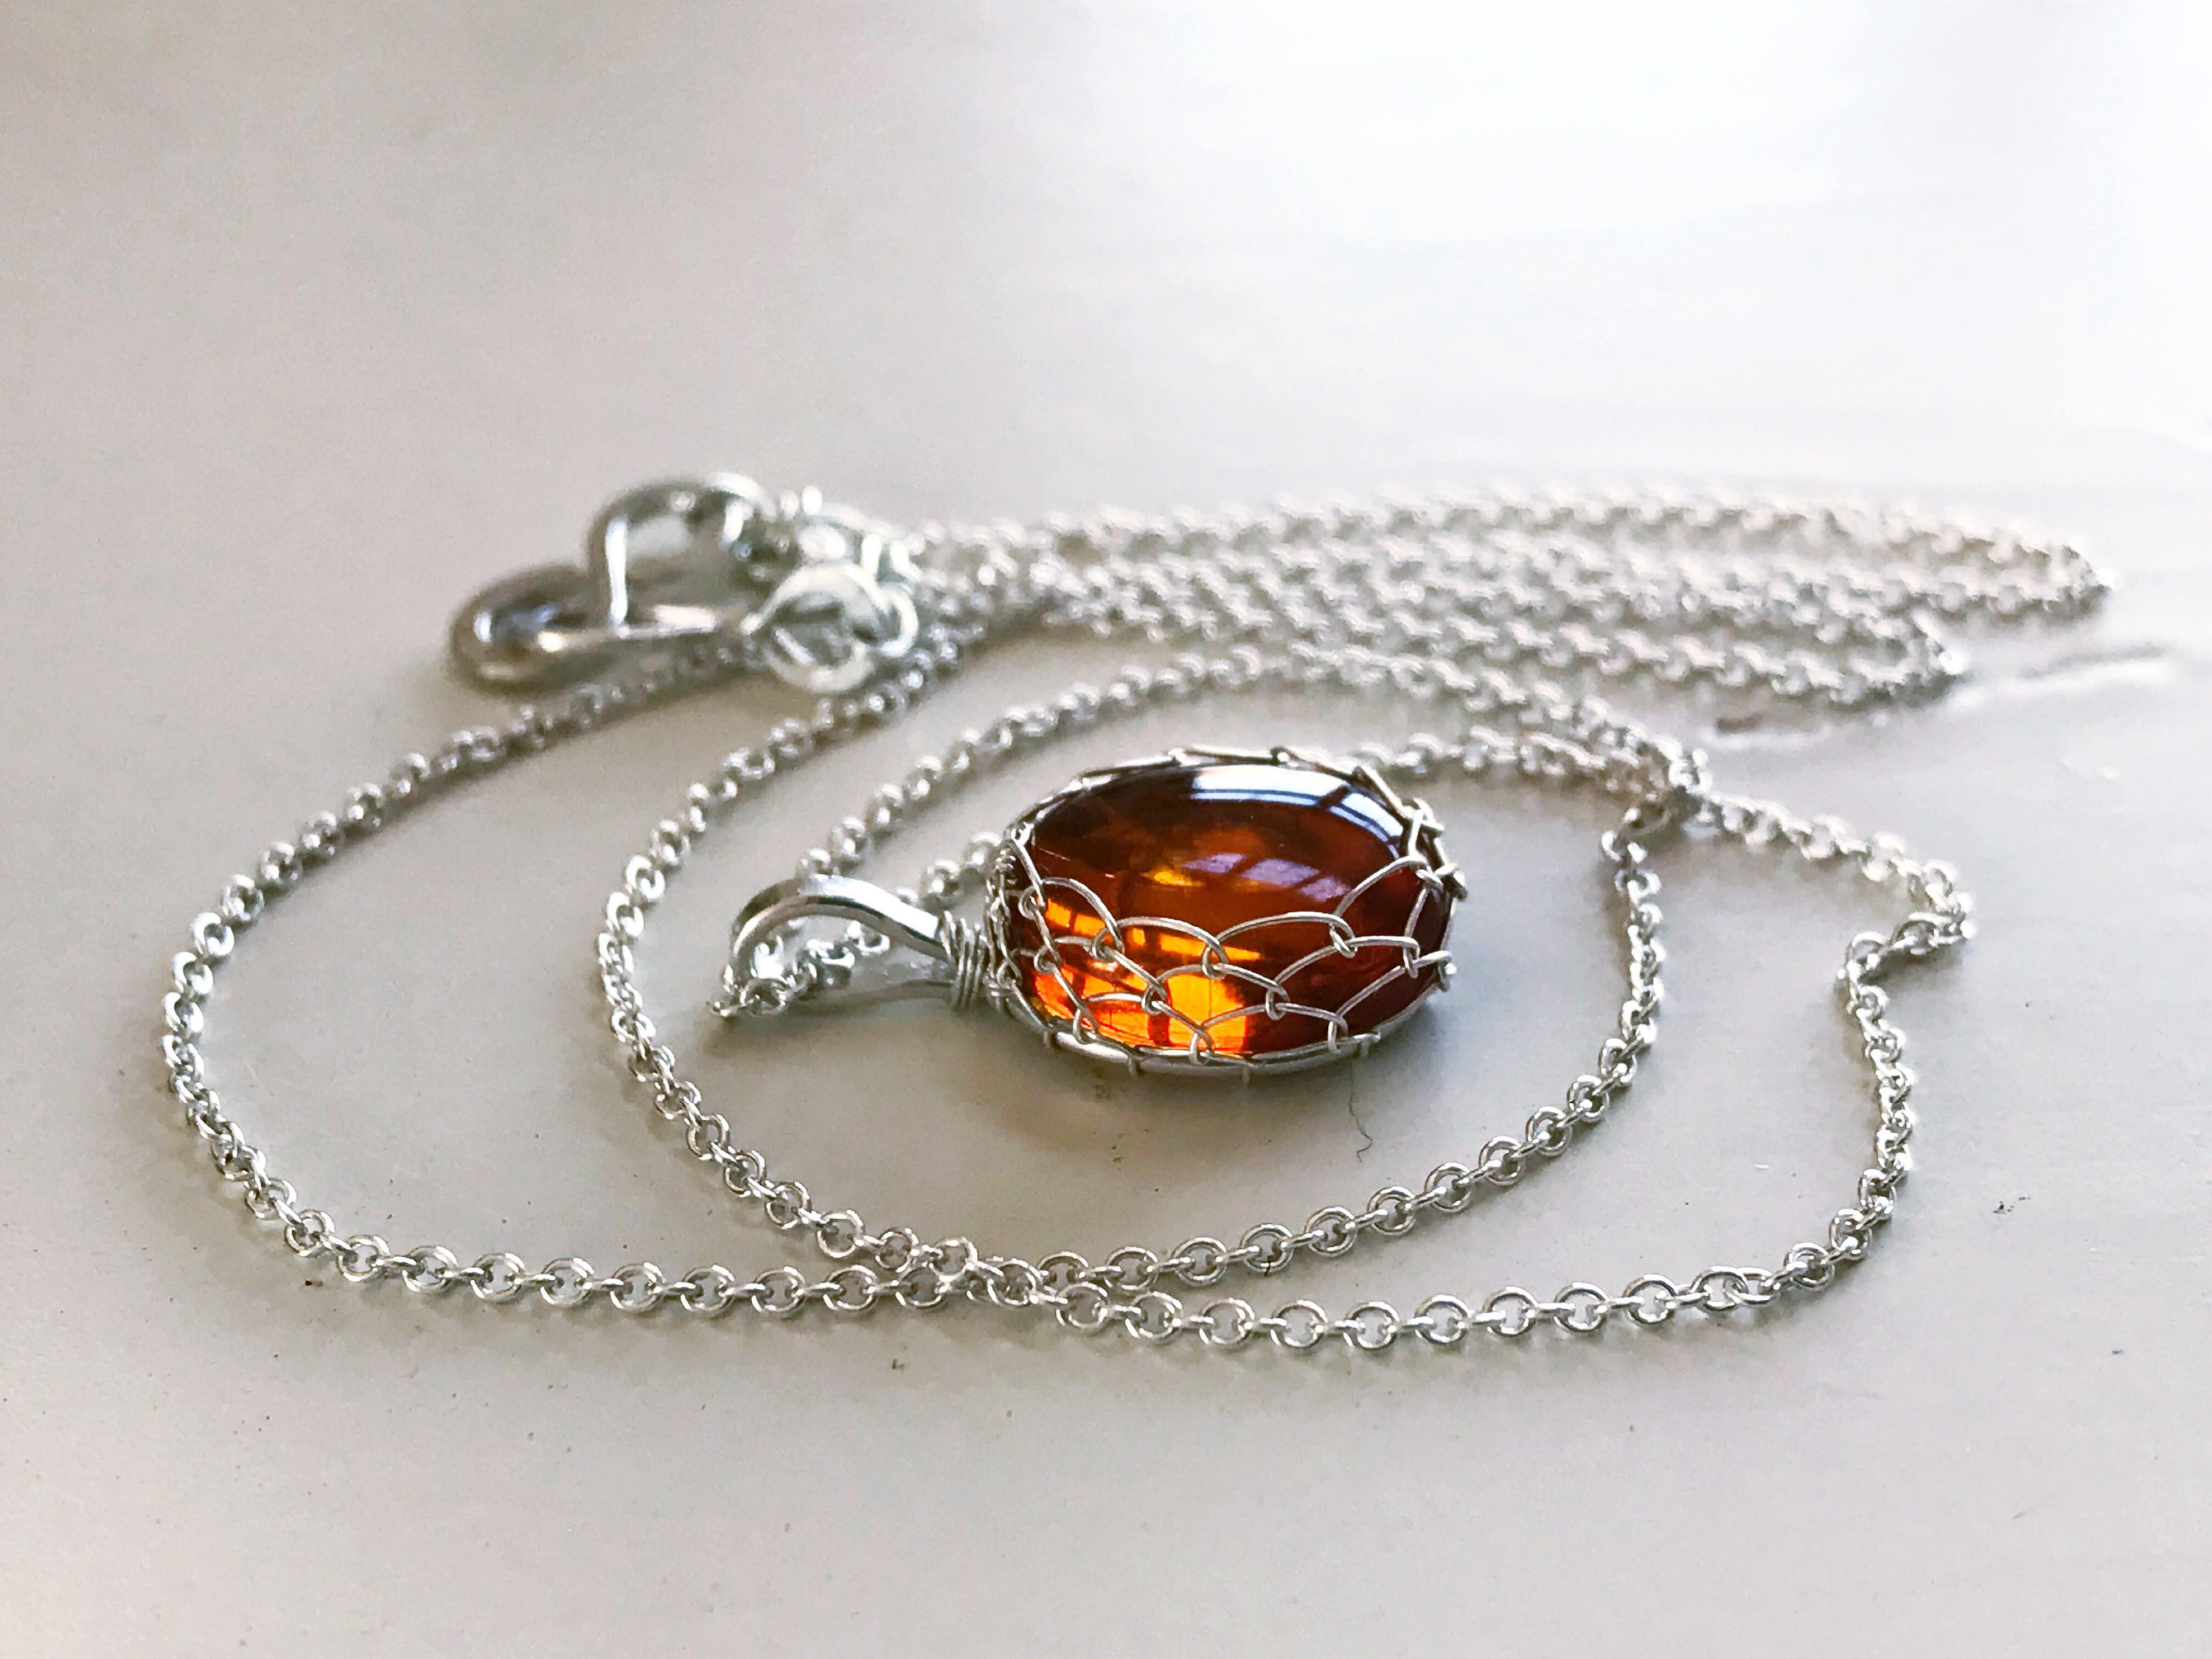 BALTIC AMBER AND STERLING SILVER 925 DESIGNER COGNAC FLOWER LEAF PENDANT NECKLACE 10 12 14 16 18 20 22 24 26 28 30 32 34 36 38 40 1mm ITALIAN SNAKE CHAIN